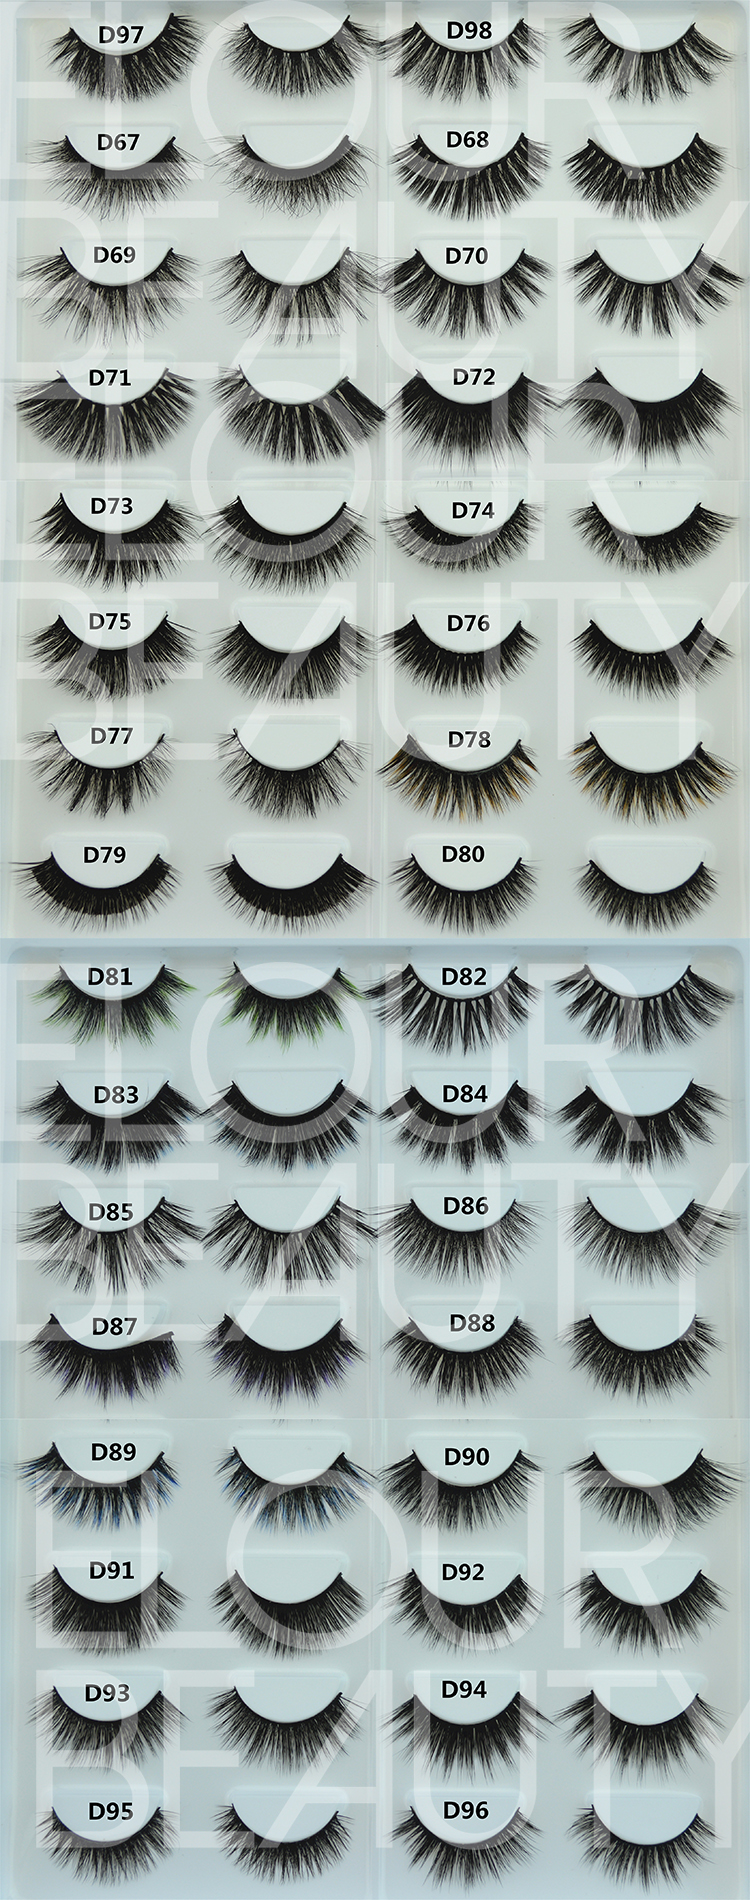 many more styles faux mink 3d lashes China.jpg